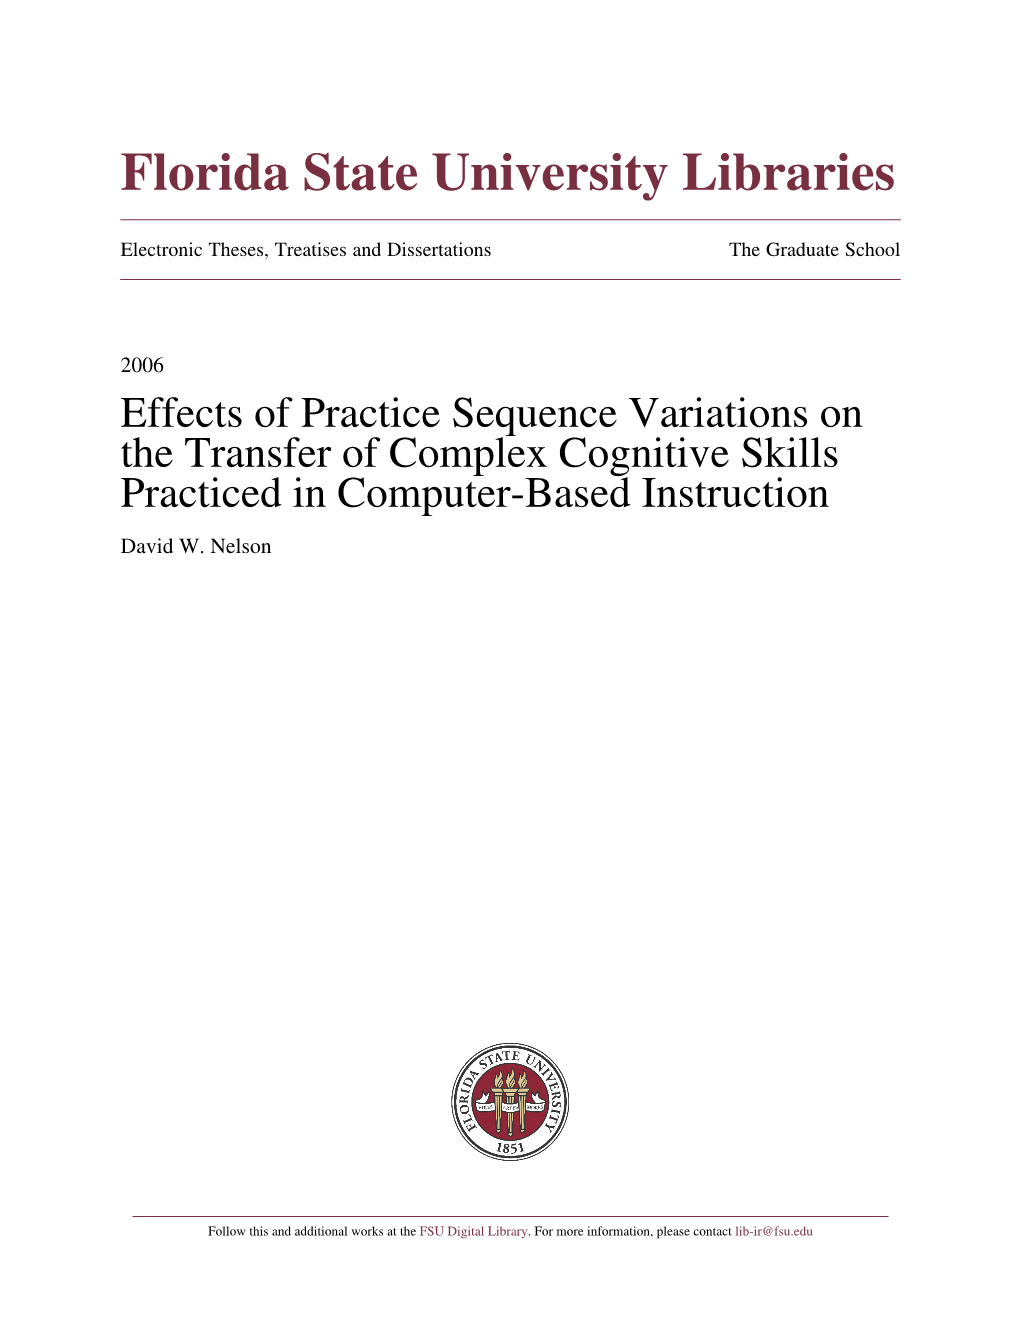 Effects of Practice Sequence Variations on the Transfer of Complex Cognitive Skills Practiced in Computer-Based Instruction David W